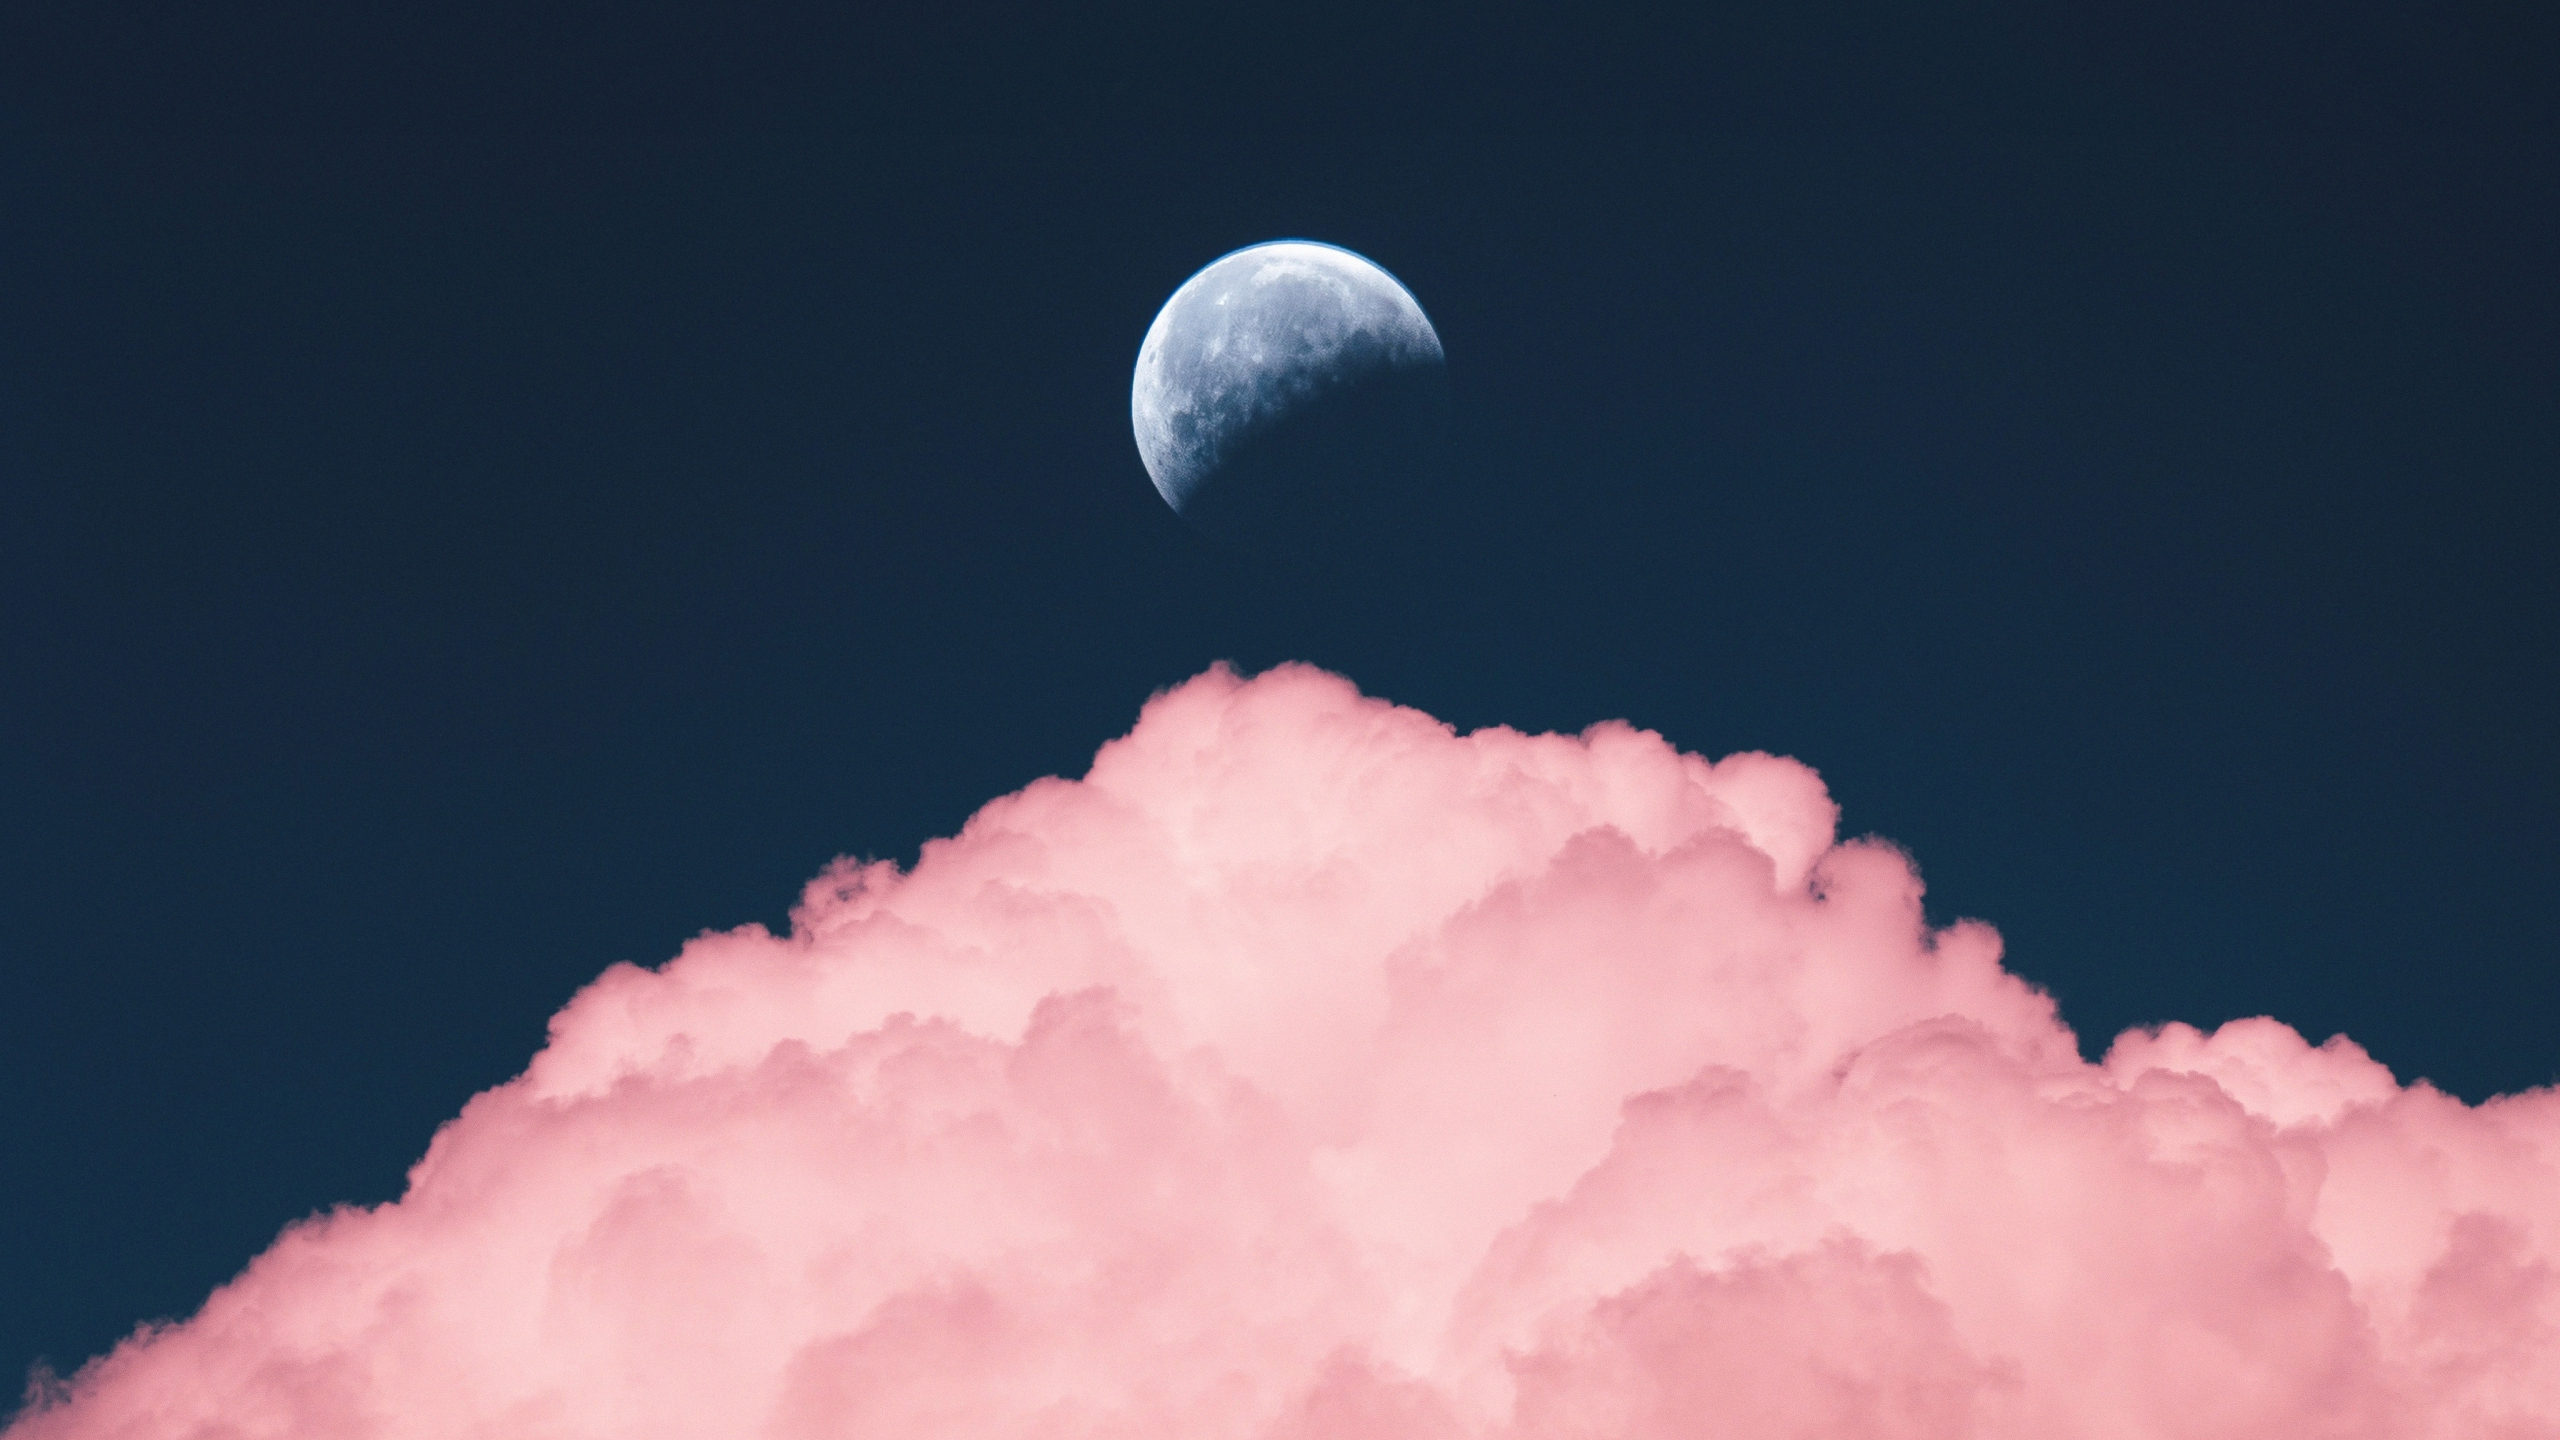 Download Wallpaper 2560x1440 Half Moon, Clouds, Dual Wide 16:9 2560x1440 HD Background, 23914